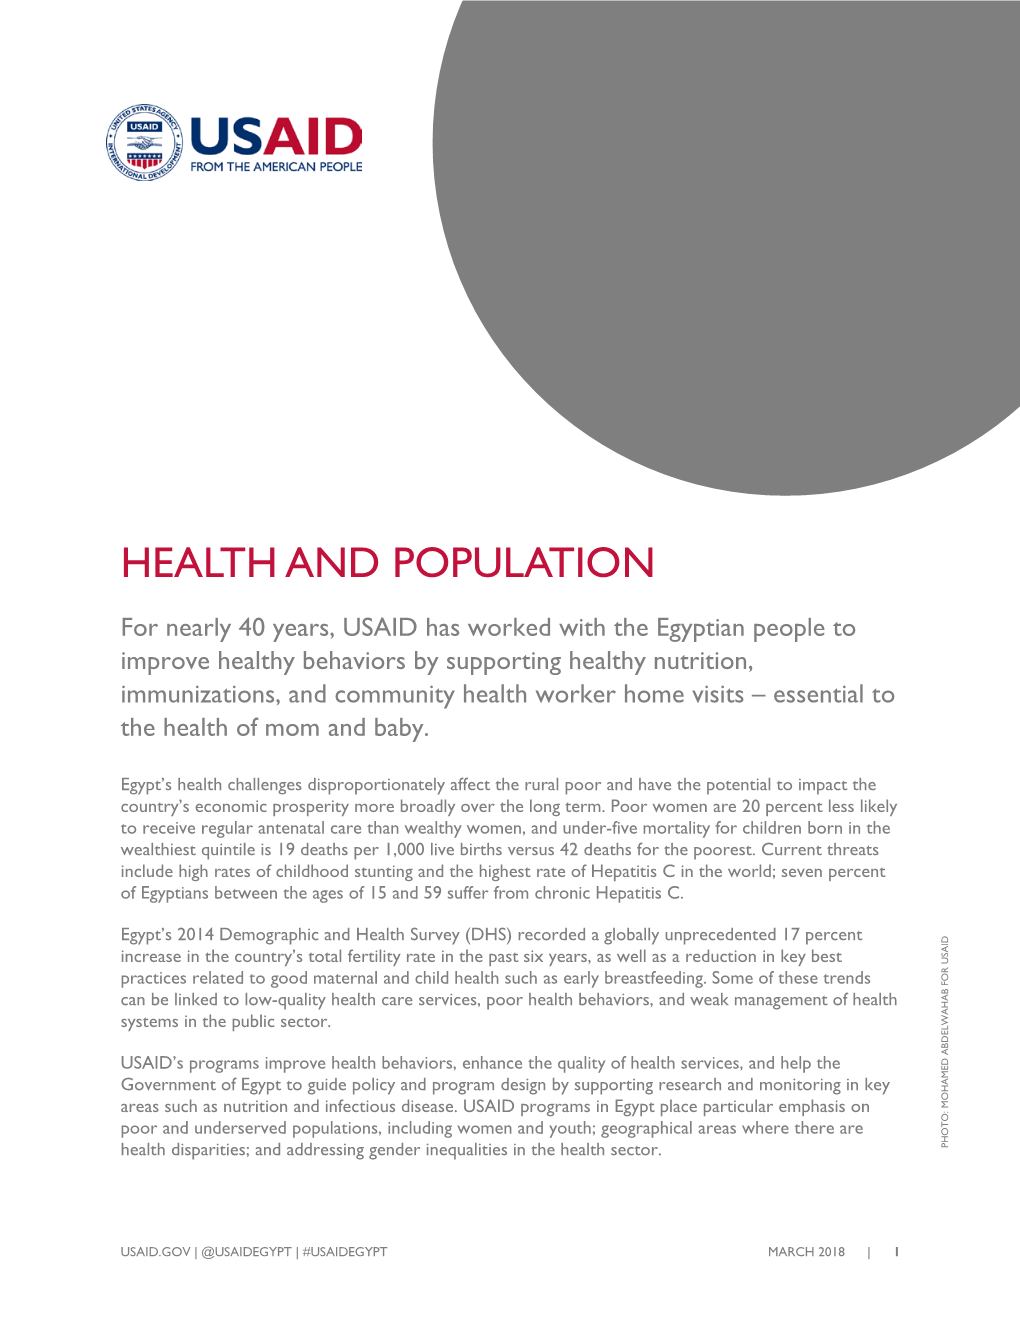 USAID/Egypt's Current Work in the Health Sector